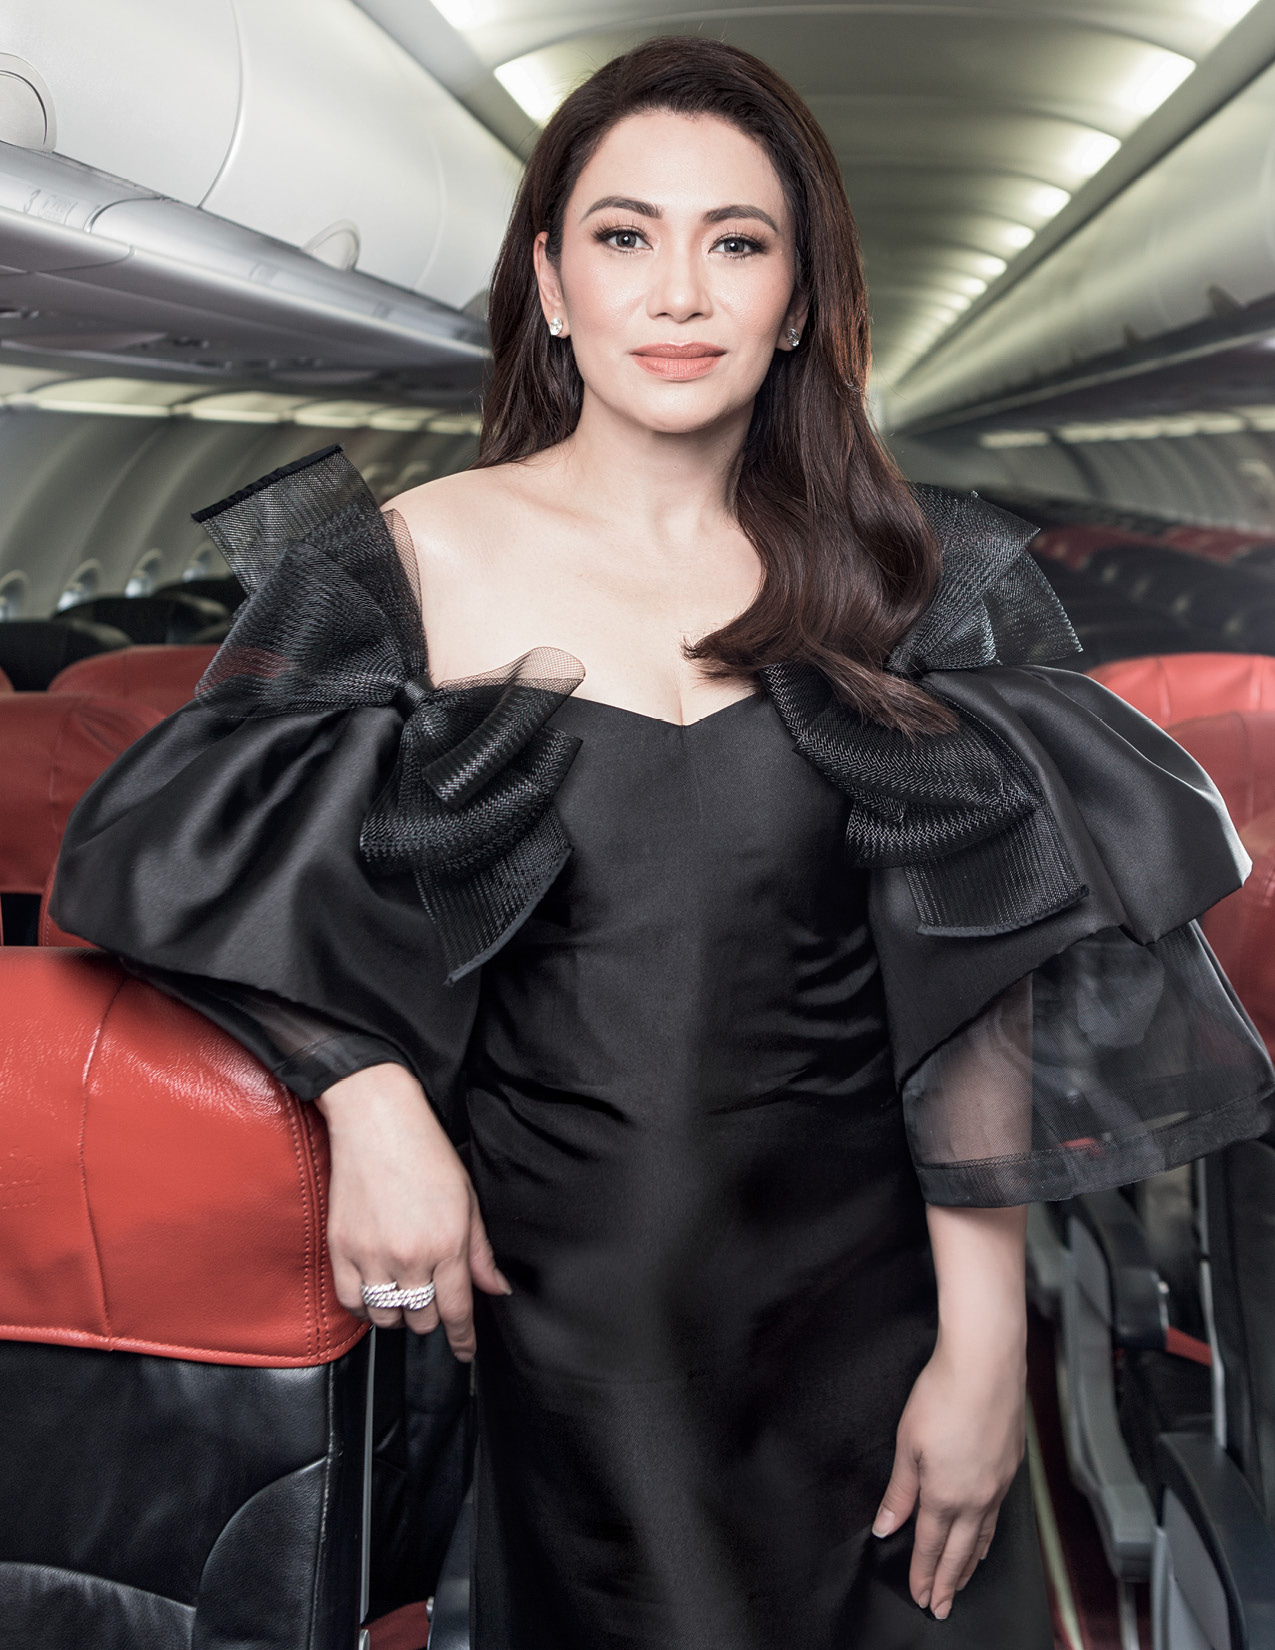 Sheila Romero: Flying high with the Lady Boss